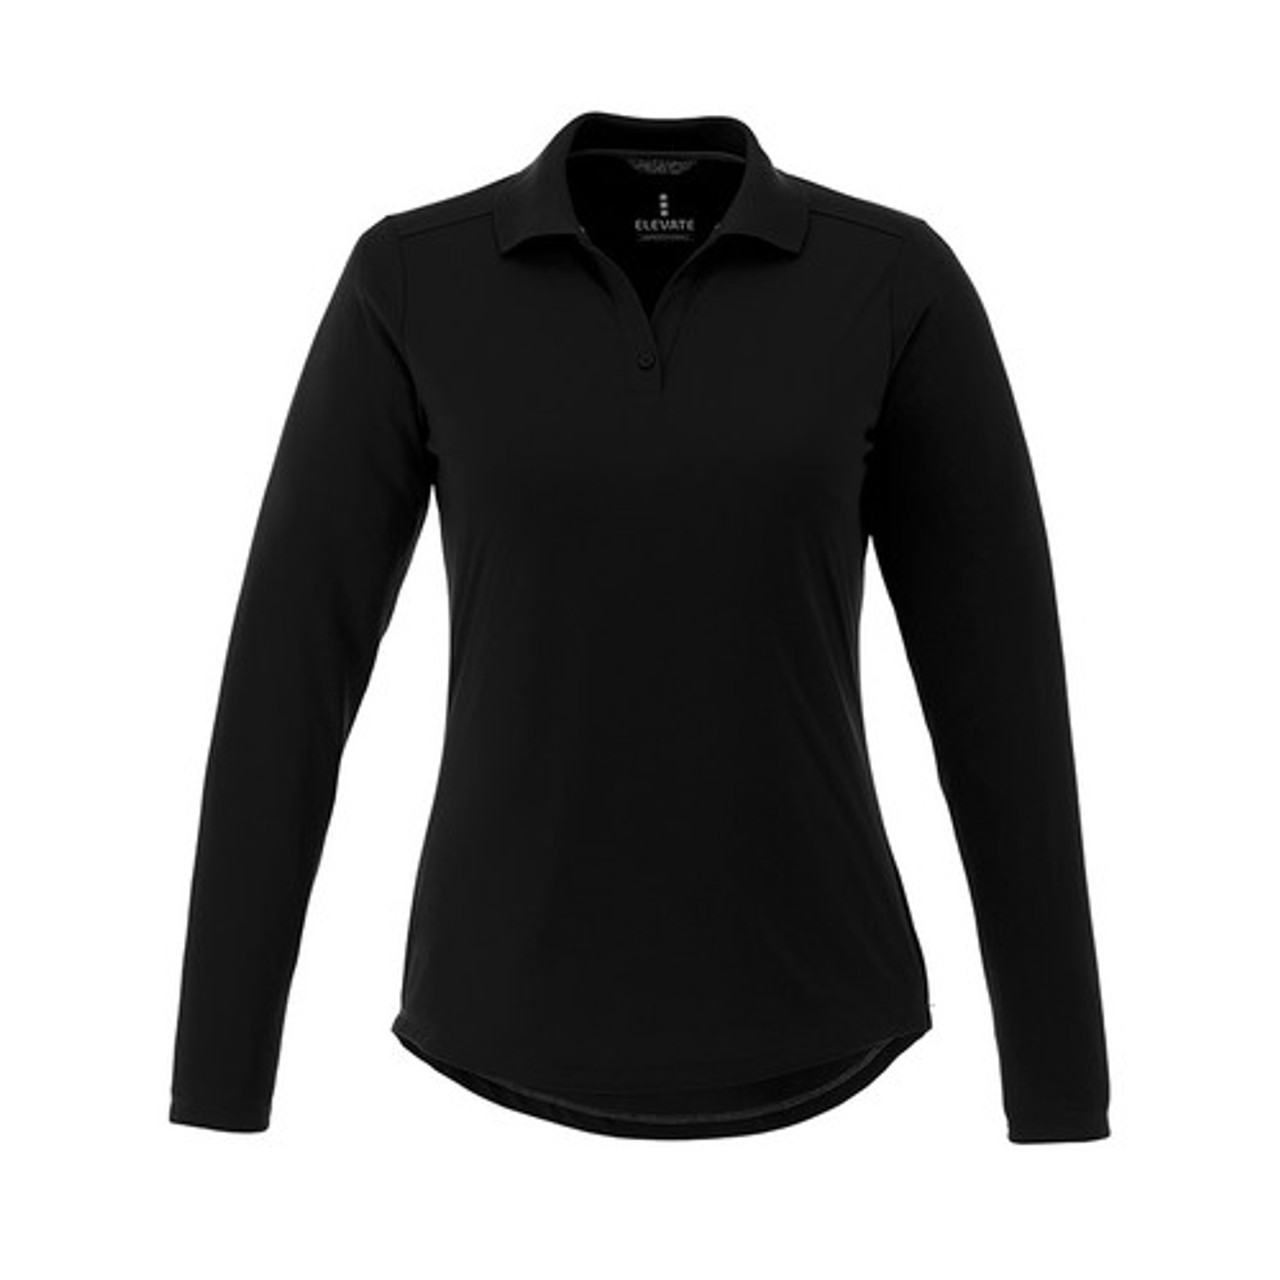 https://cdn11.bigcommerce.com/s-bf37c/images/stencil/1280x1280/products/1205/9431/96255_Elevate_Mori_Polo_Black__74614__55335.1698792140.jpg?c=2?imbypass=on